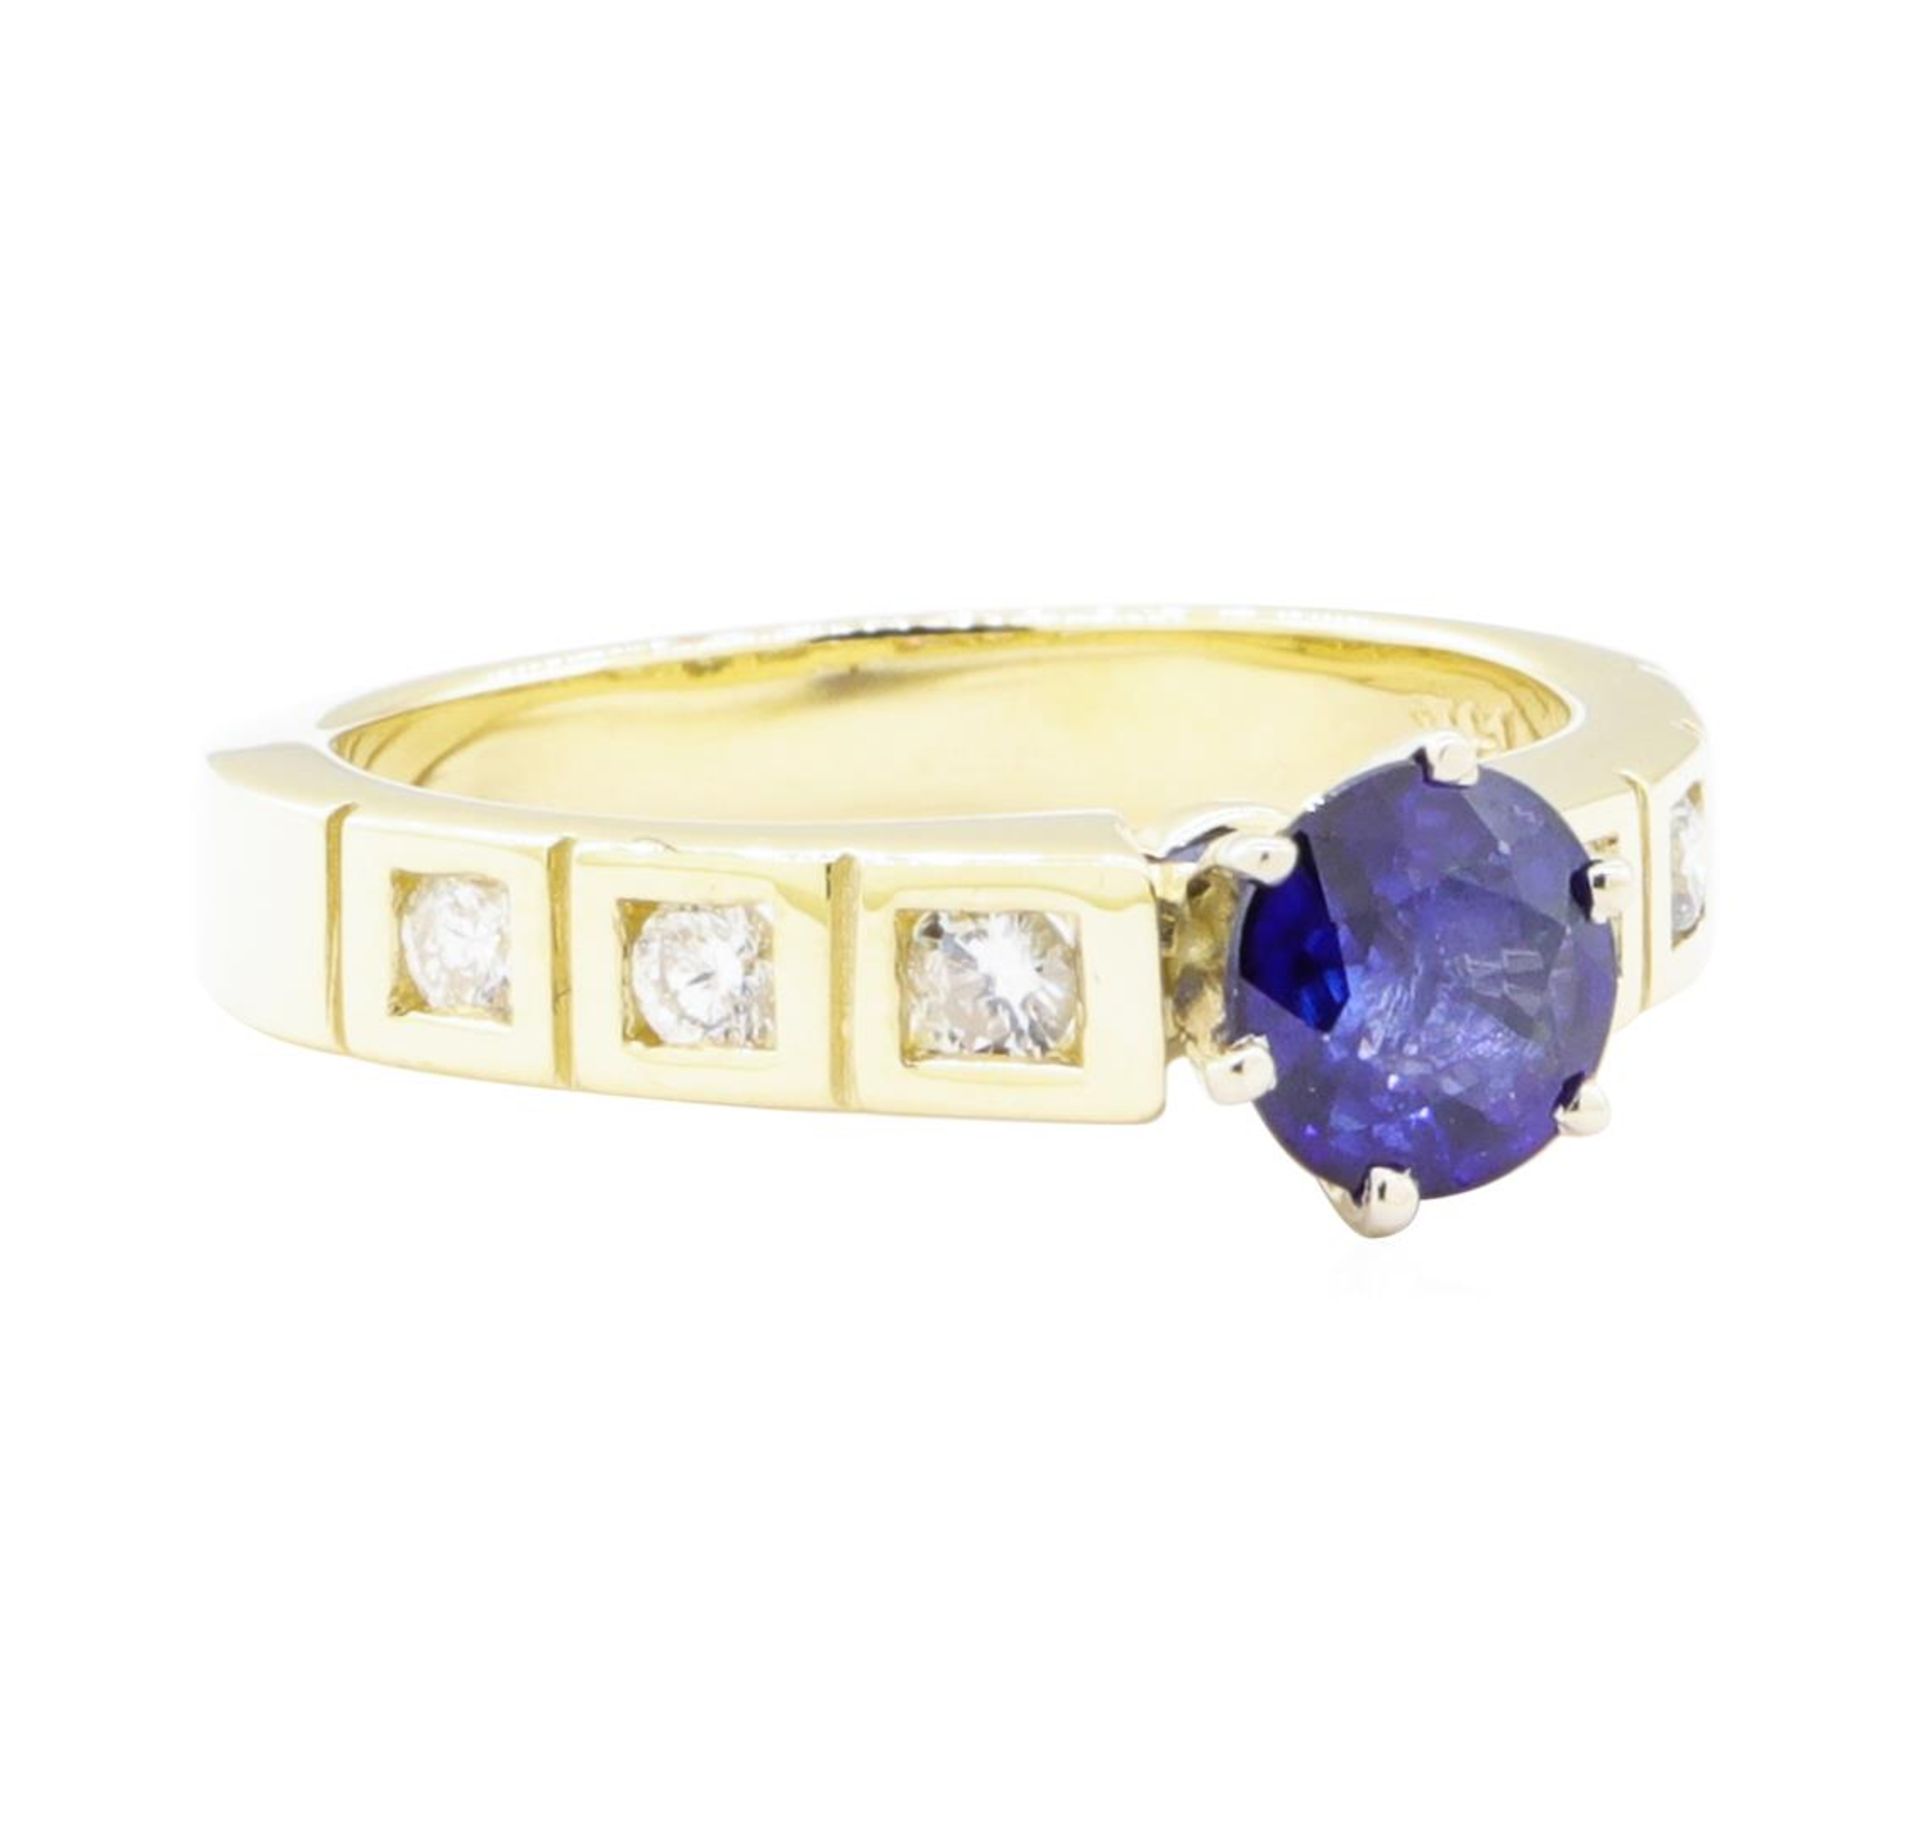 1.34ctw Sapphire and Diamond Ring - 14KT Yellow Gold